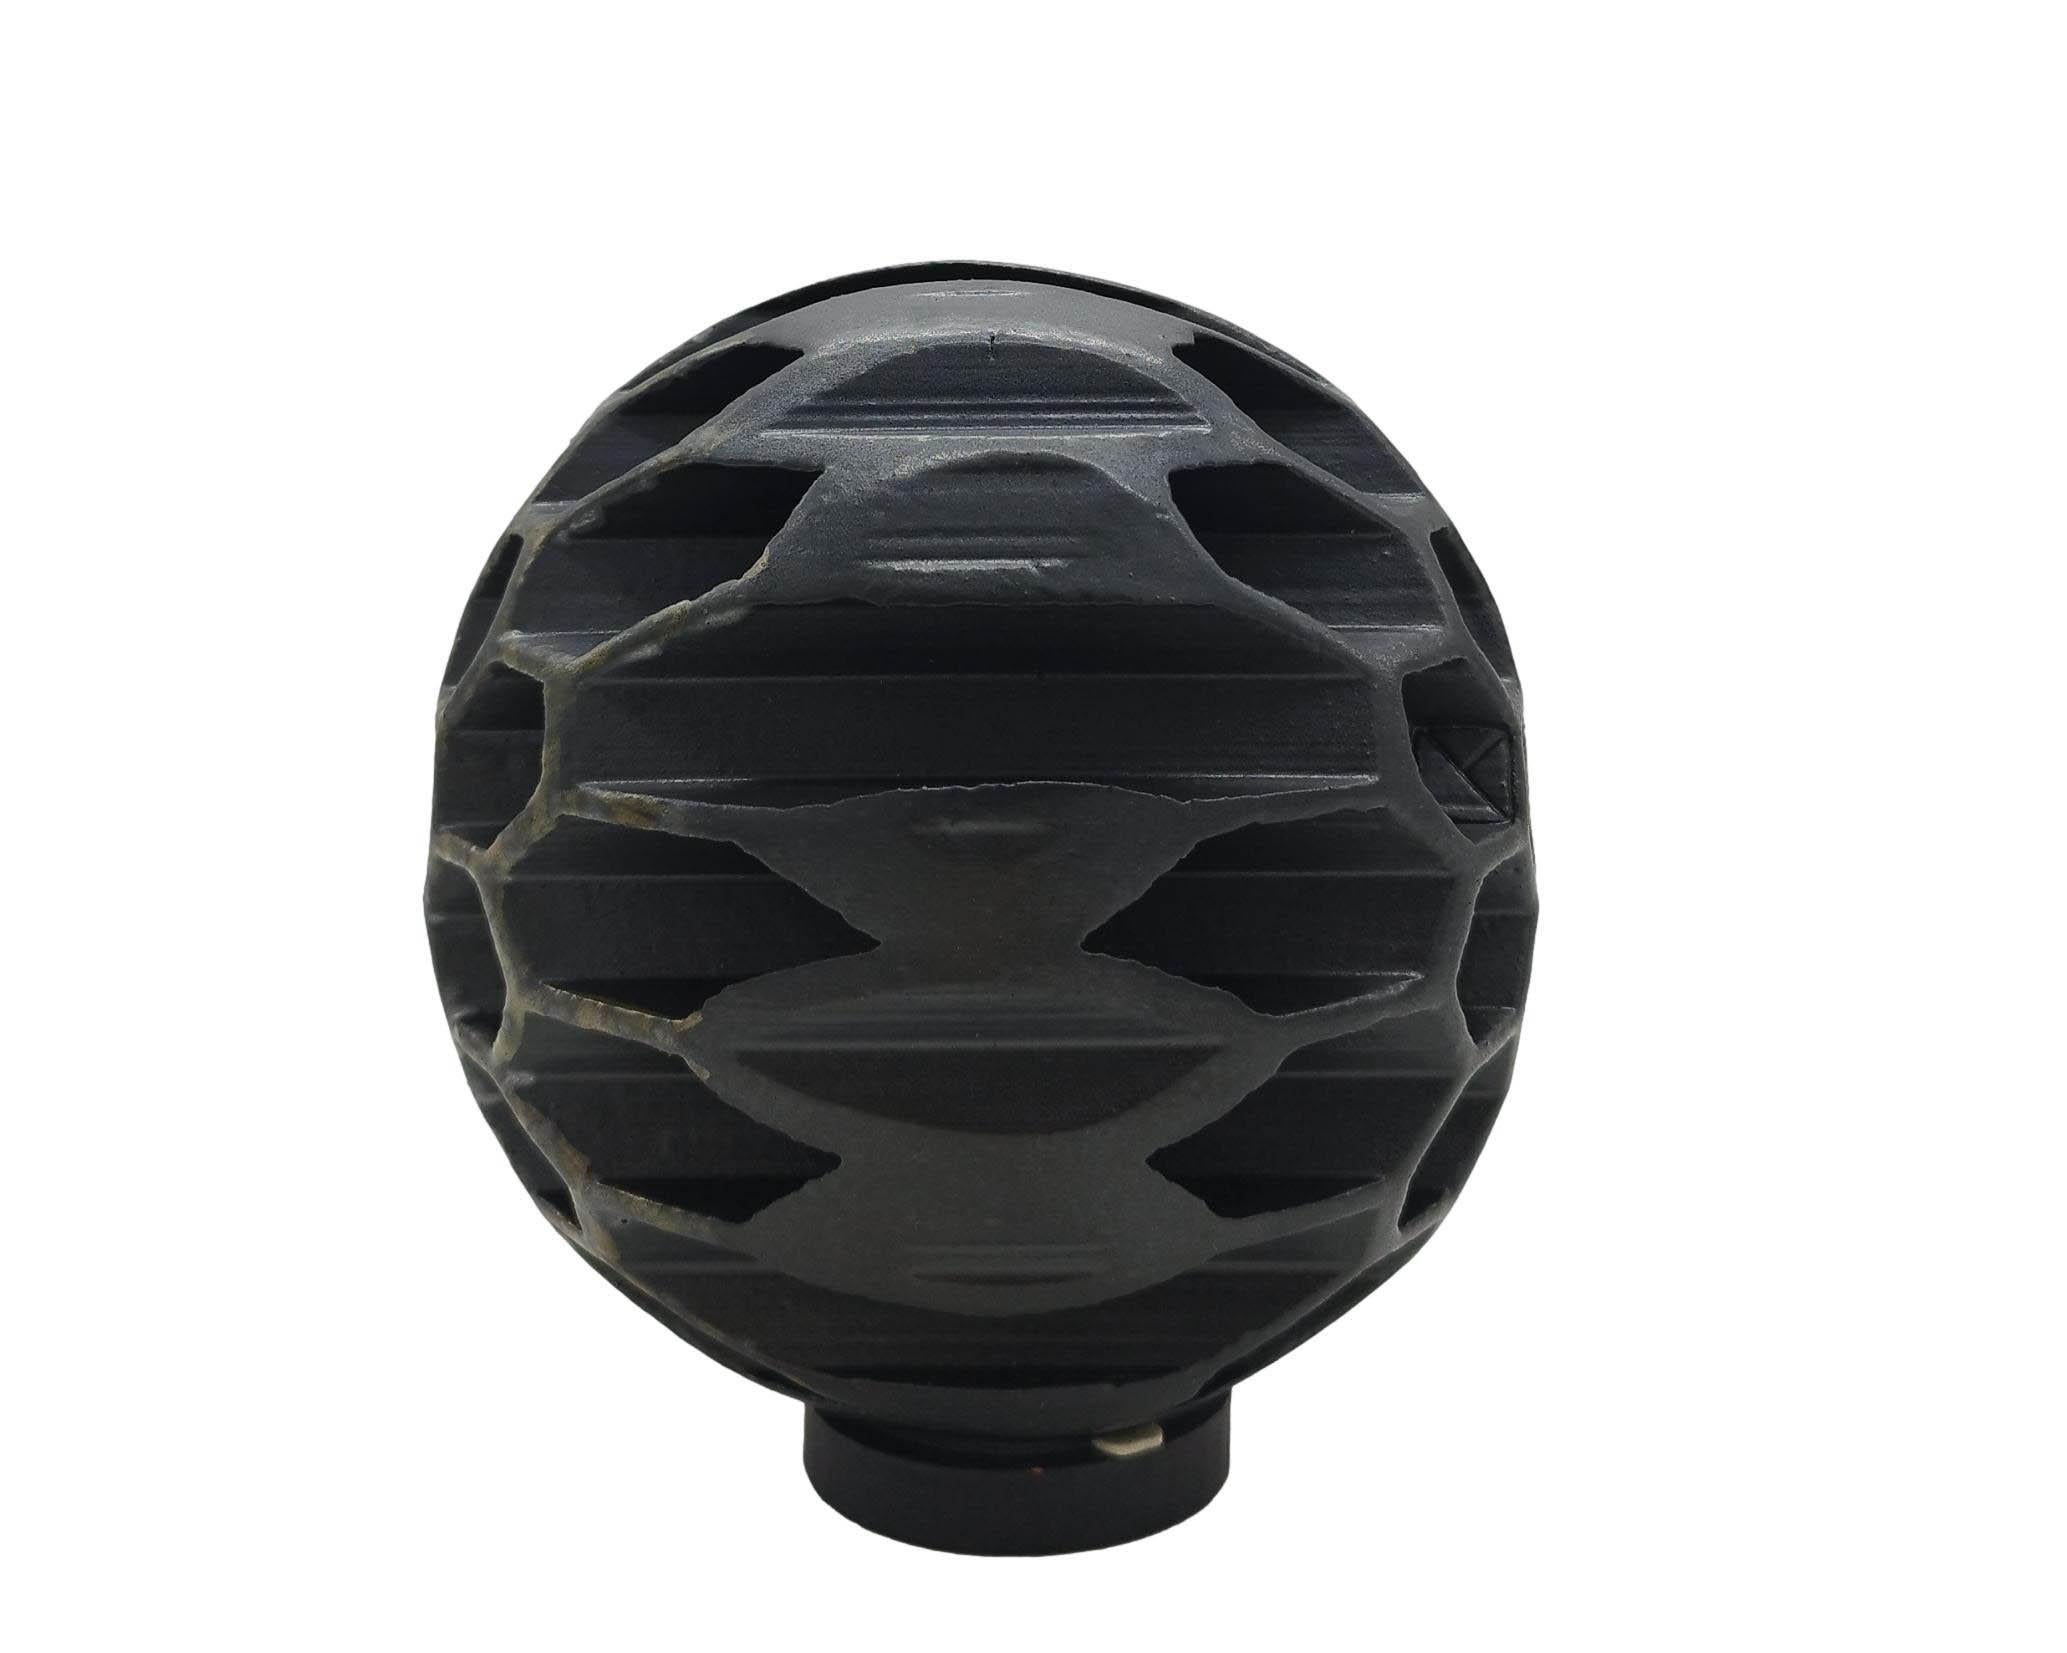 Mid-Century Modern Alessio Tasca Anthracite Ceramic Sphere Sculpture, Italy, 1960s For Sale